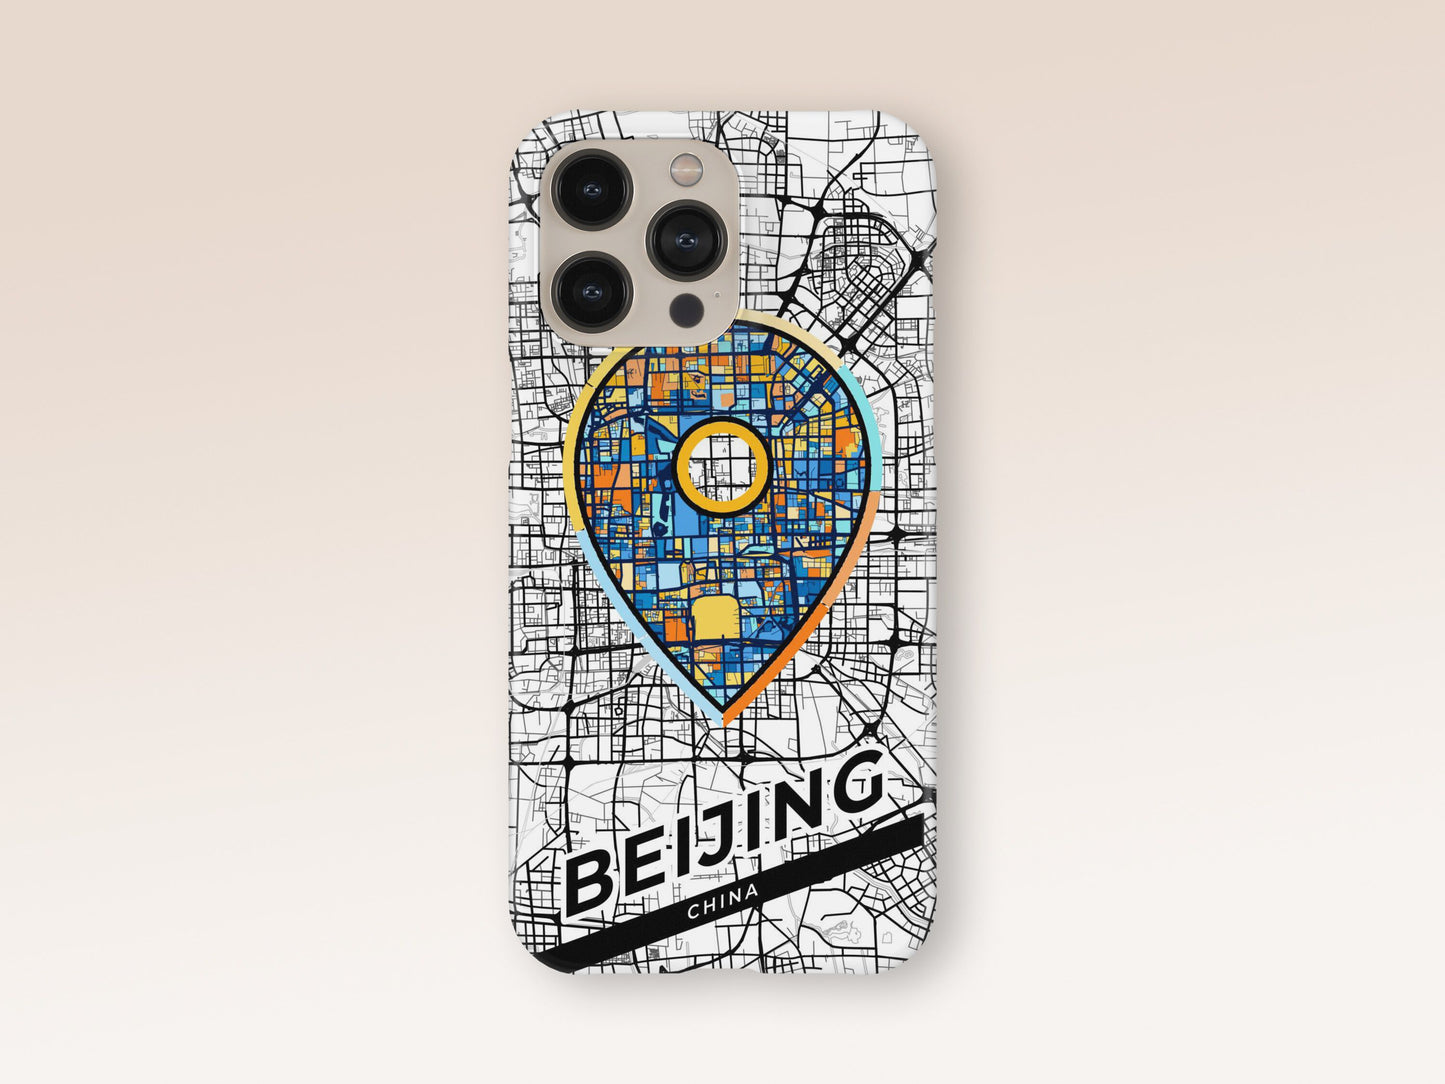 Beijing China slim phone case with colorful icon. Birthday, wedding or housewarming gift. Couple match cases. 1